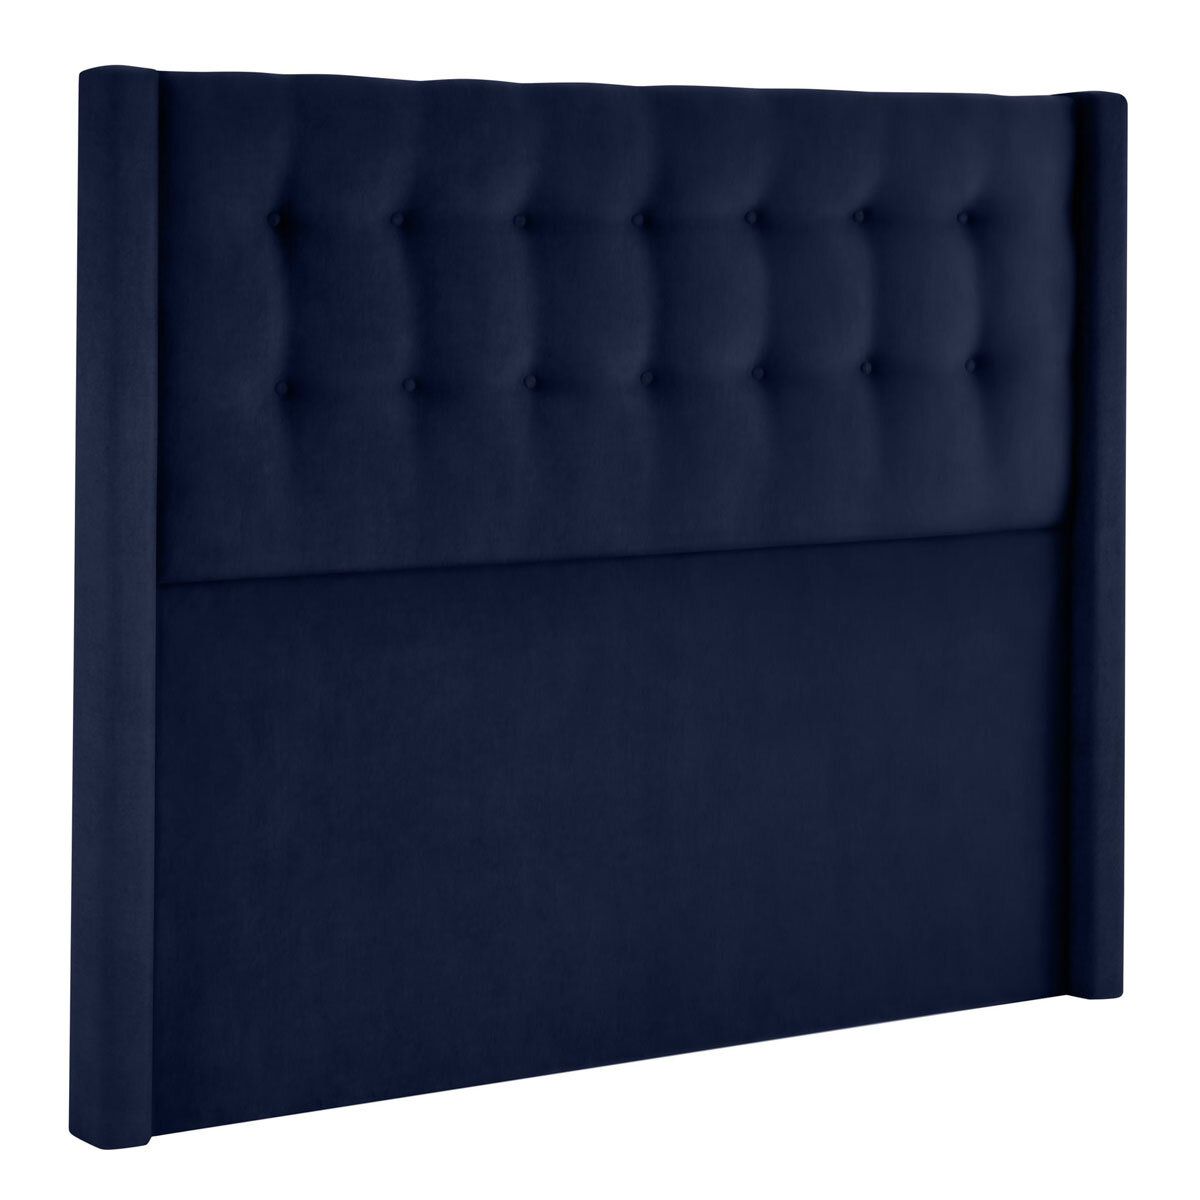 Silentnight Velvet Continental Divan Base with Bloomsbury Headboard in 2 Colours & 3 Sizes